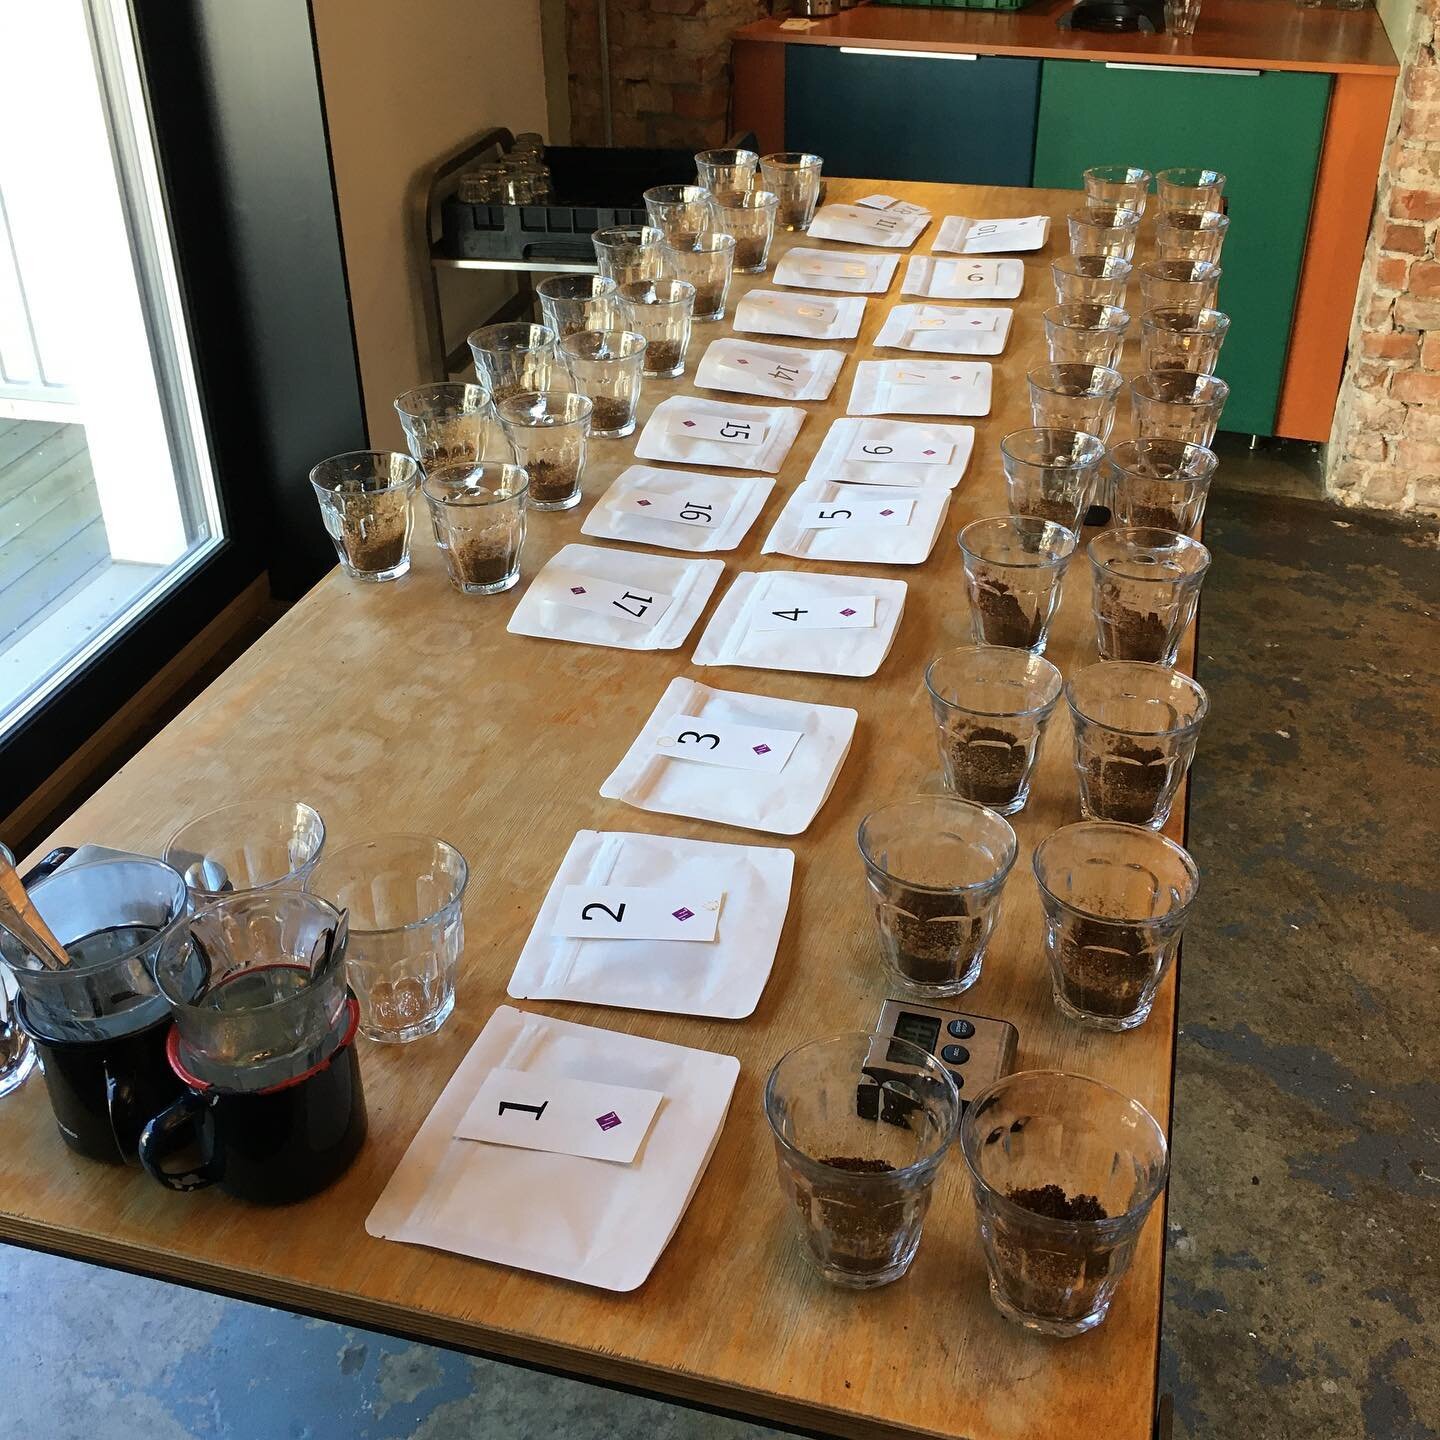 ...had a really nice cupping session with Espen at @nordicapproach  yesterday. Great service, friendly people... #cupping #specialtycoffee #nordicapproach #polarbearcoffeeroasters #greatservice #flexibility